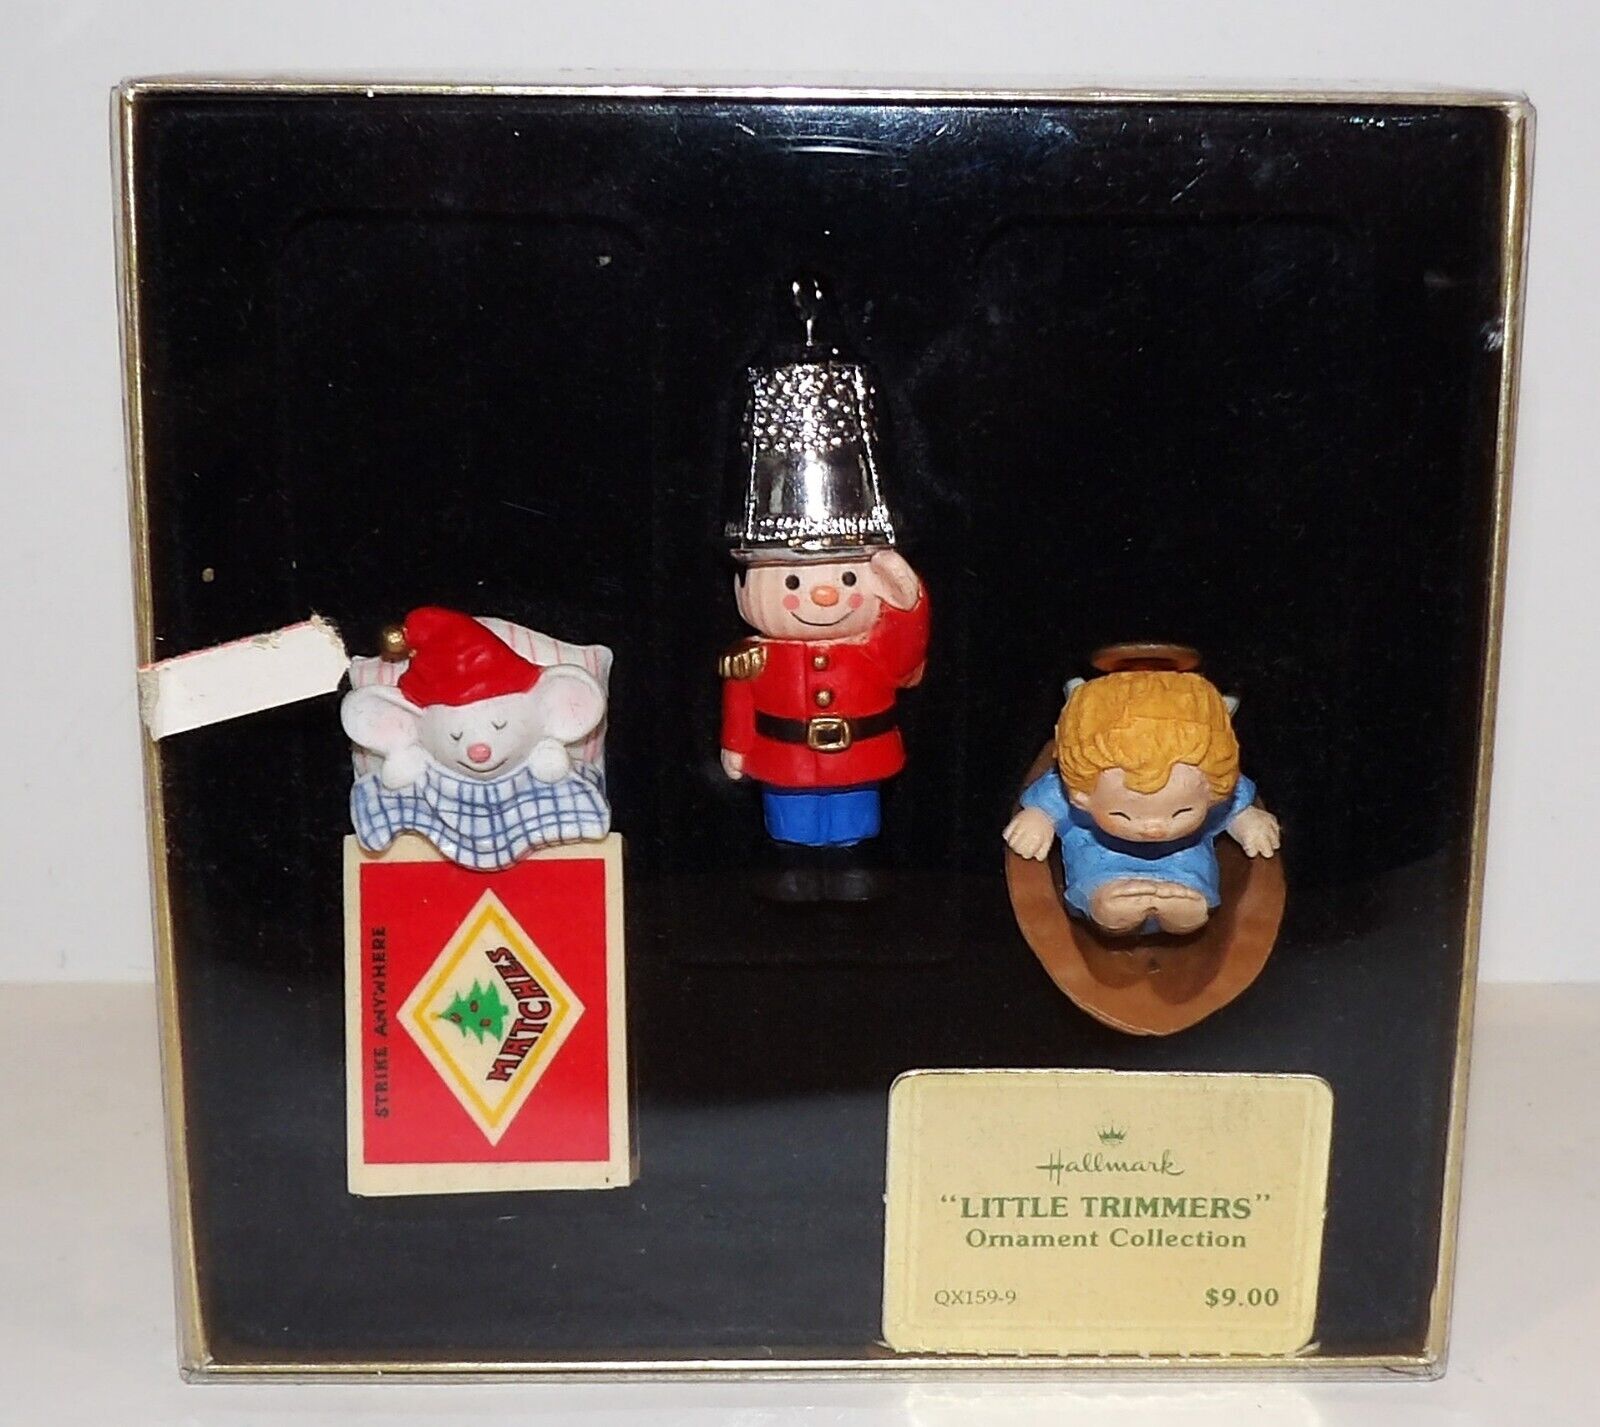 ADORABLE VINTAGE 1979 HALLMARK QX159-9 LITTLE TRIMMERS SET OF 3 ORNAMENTS IN BOX